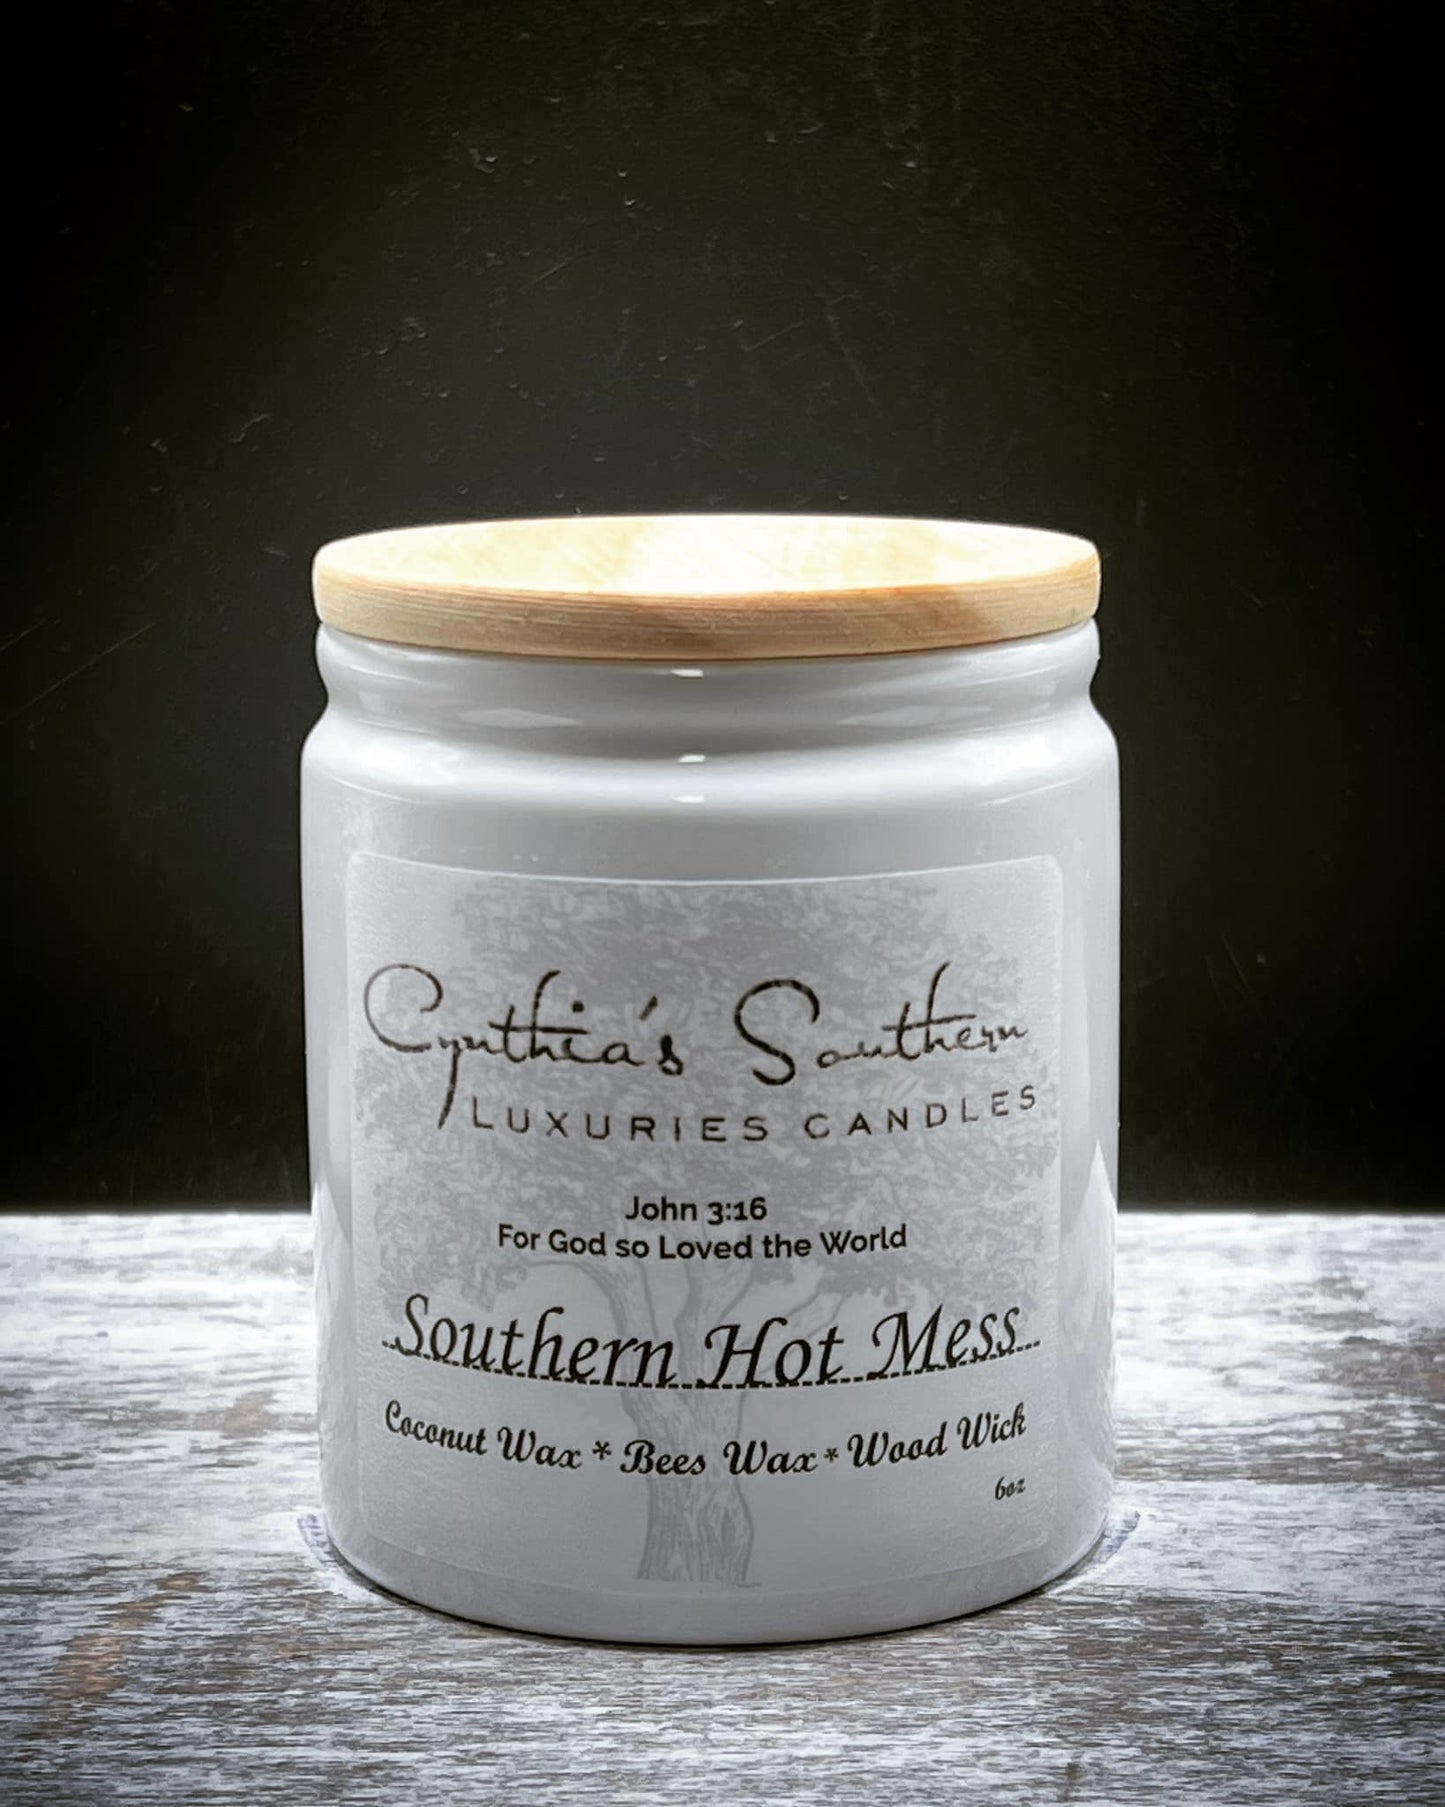 Southern Hot Mess Candle